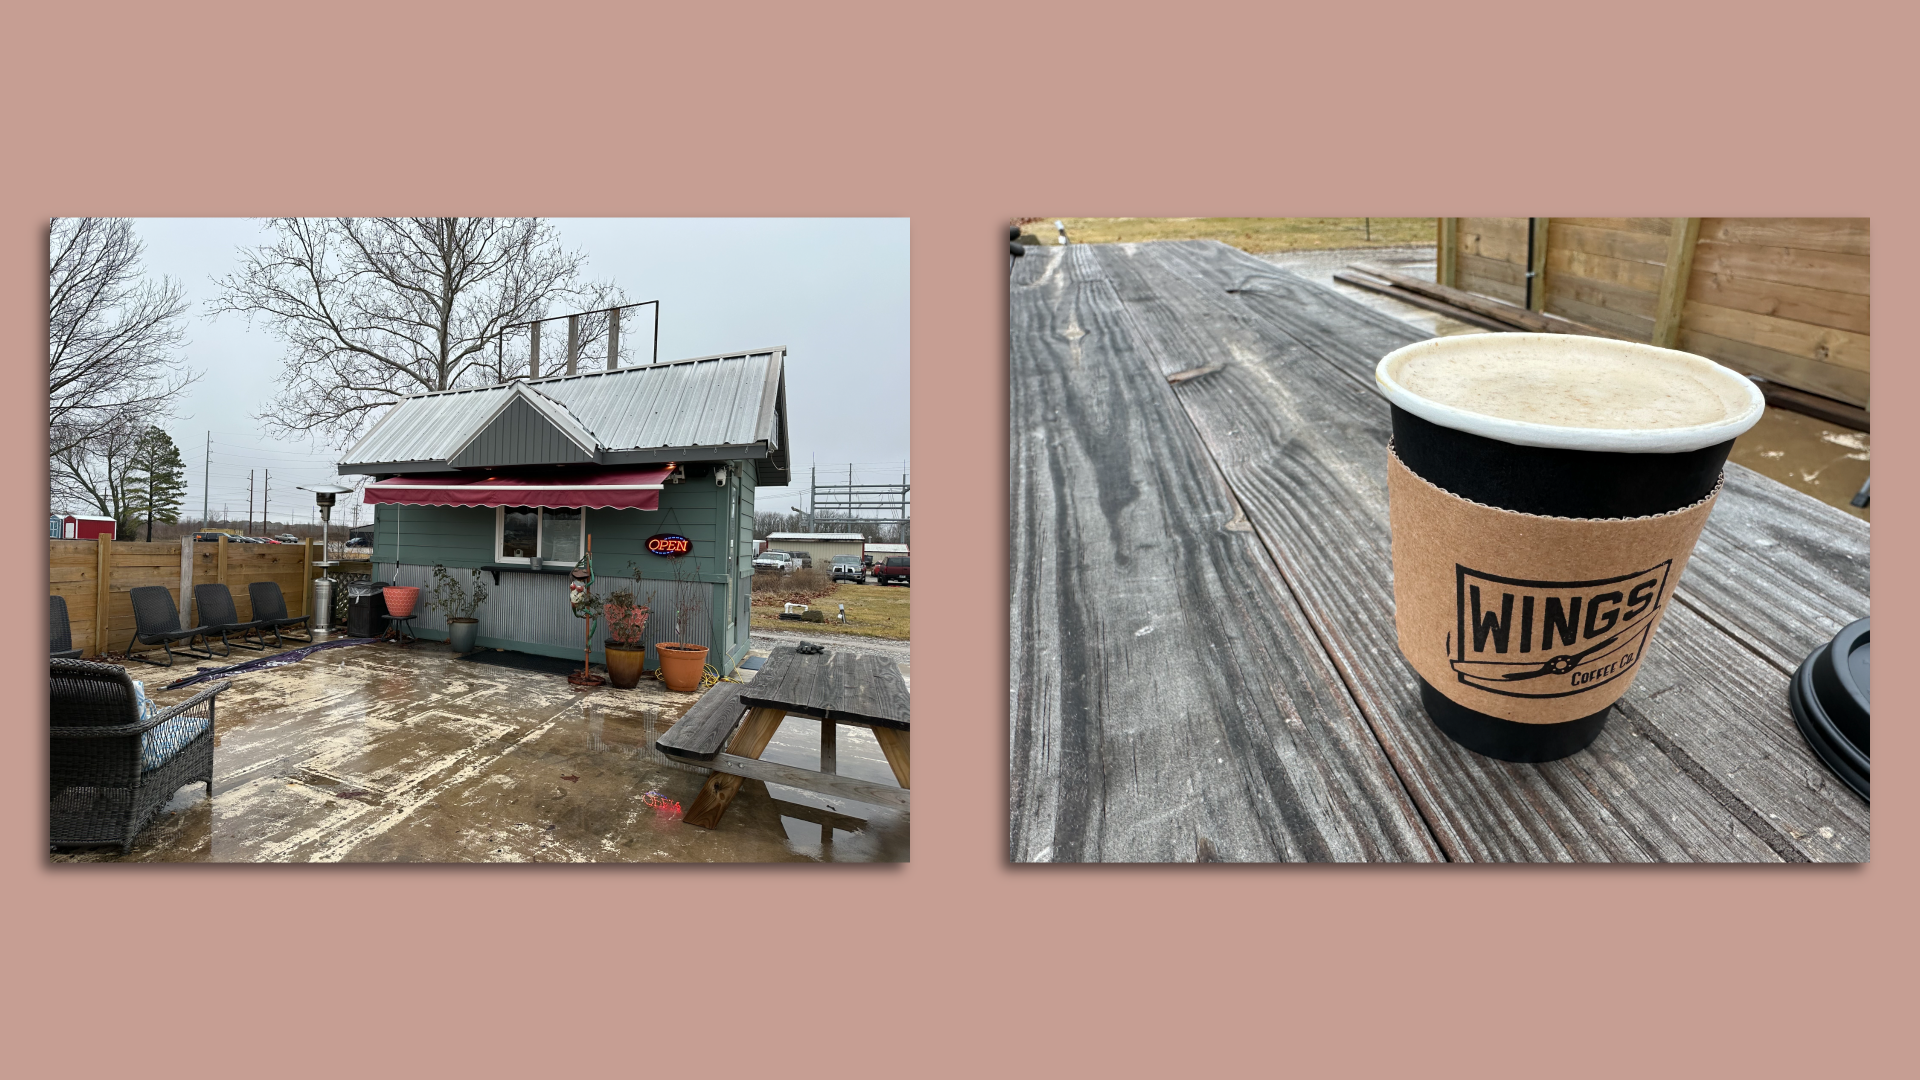 Left: Wings coffee shop; Right: A cup of coffee